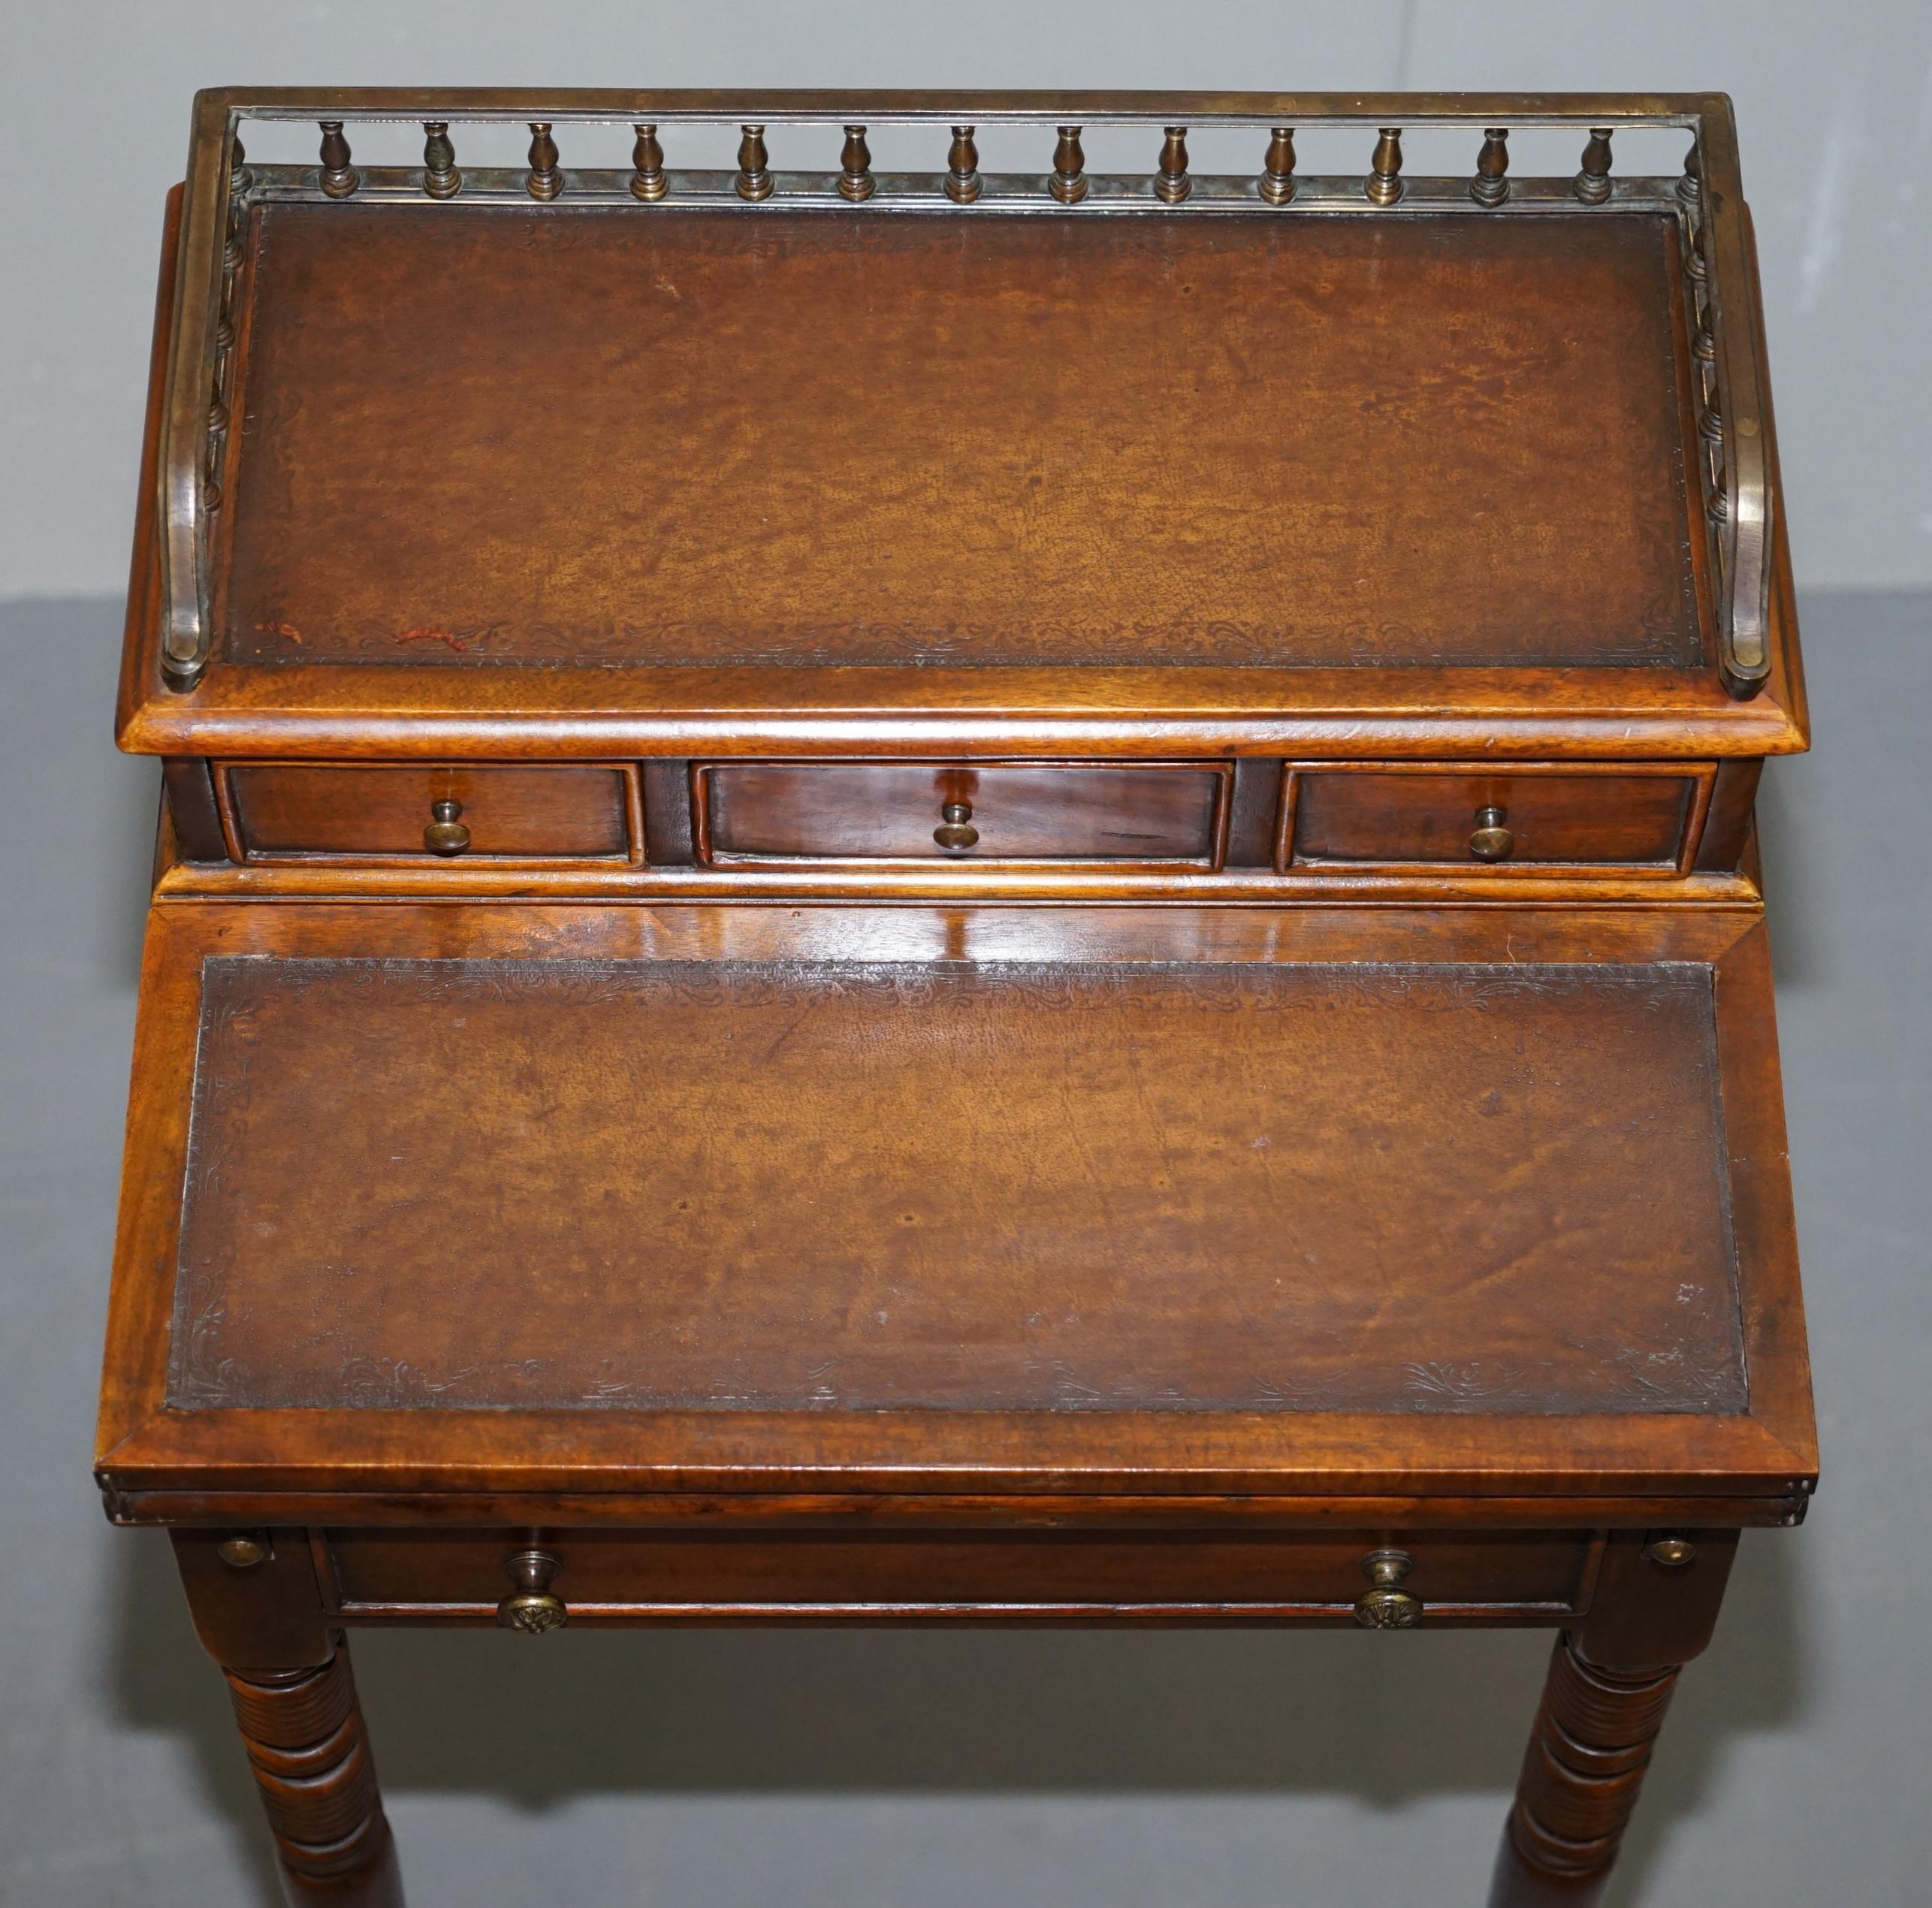 Hand-Crafted Theodore Alexander Brown Leather Folding Bureau Desk Writing Table